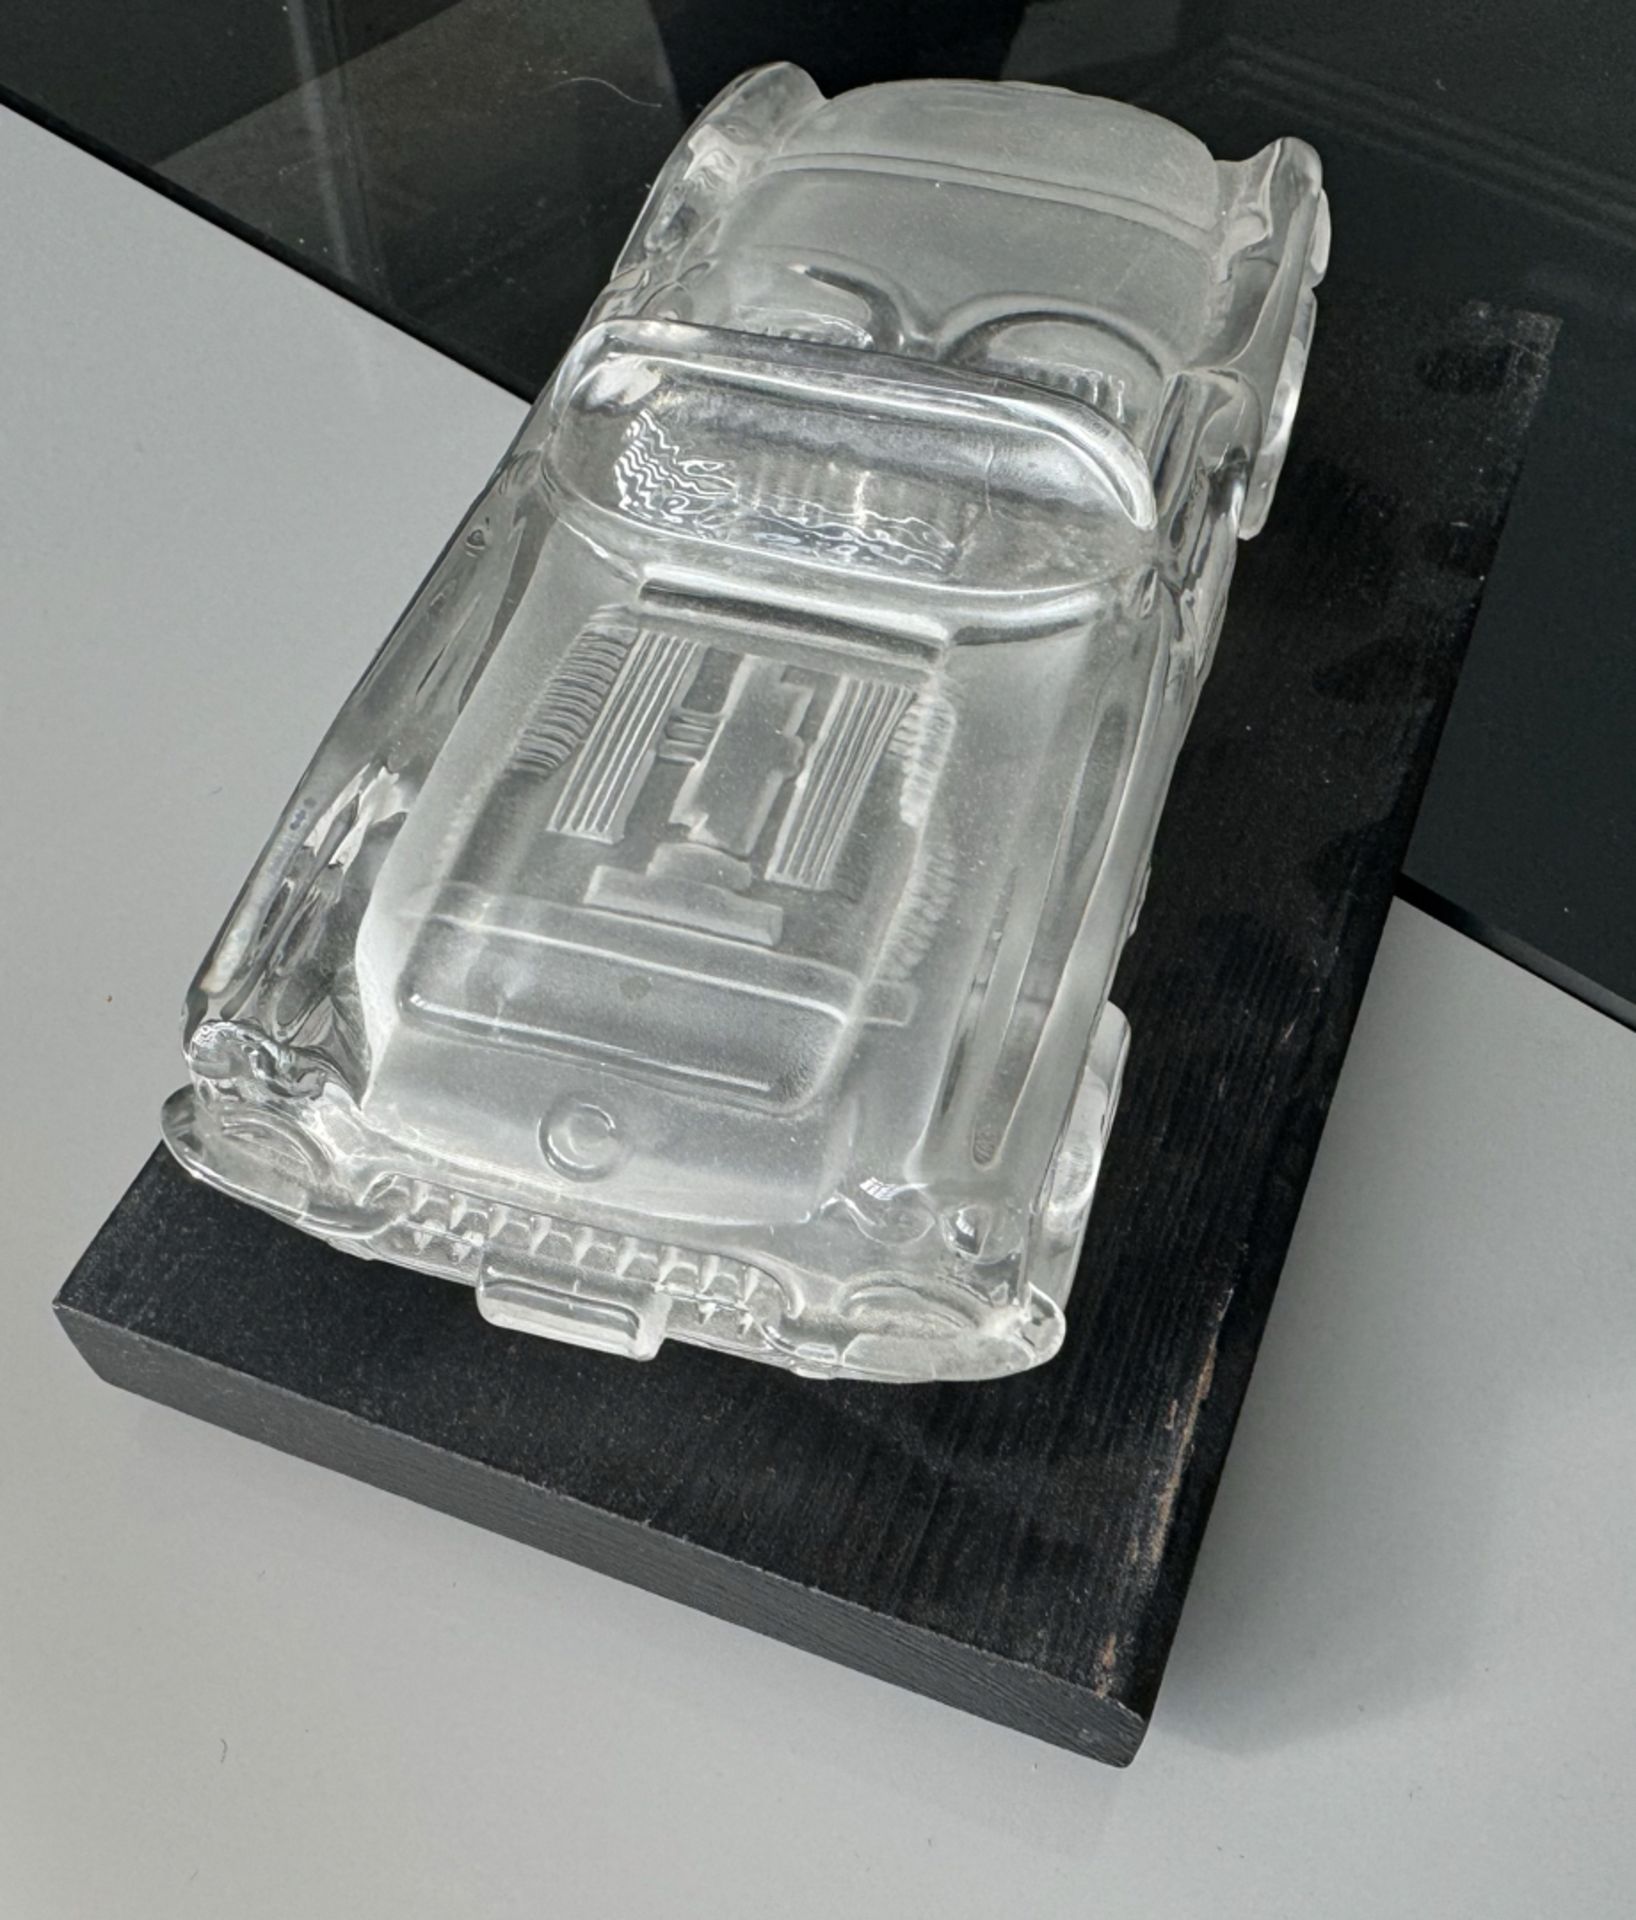 Hofbauer 1959 Corvette Glass Crystal Car Display with Base - Image 3 of 3